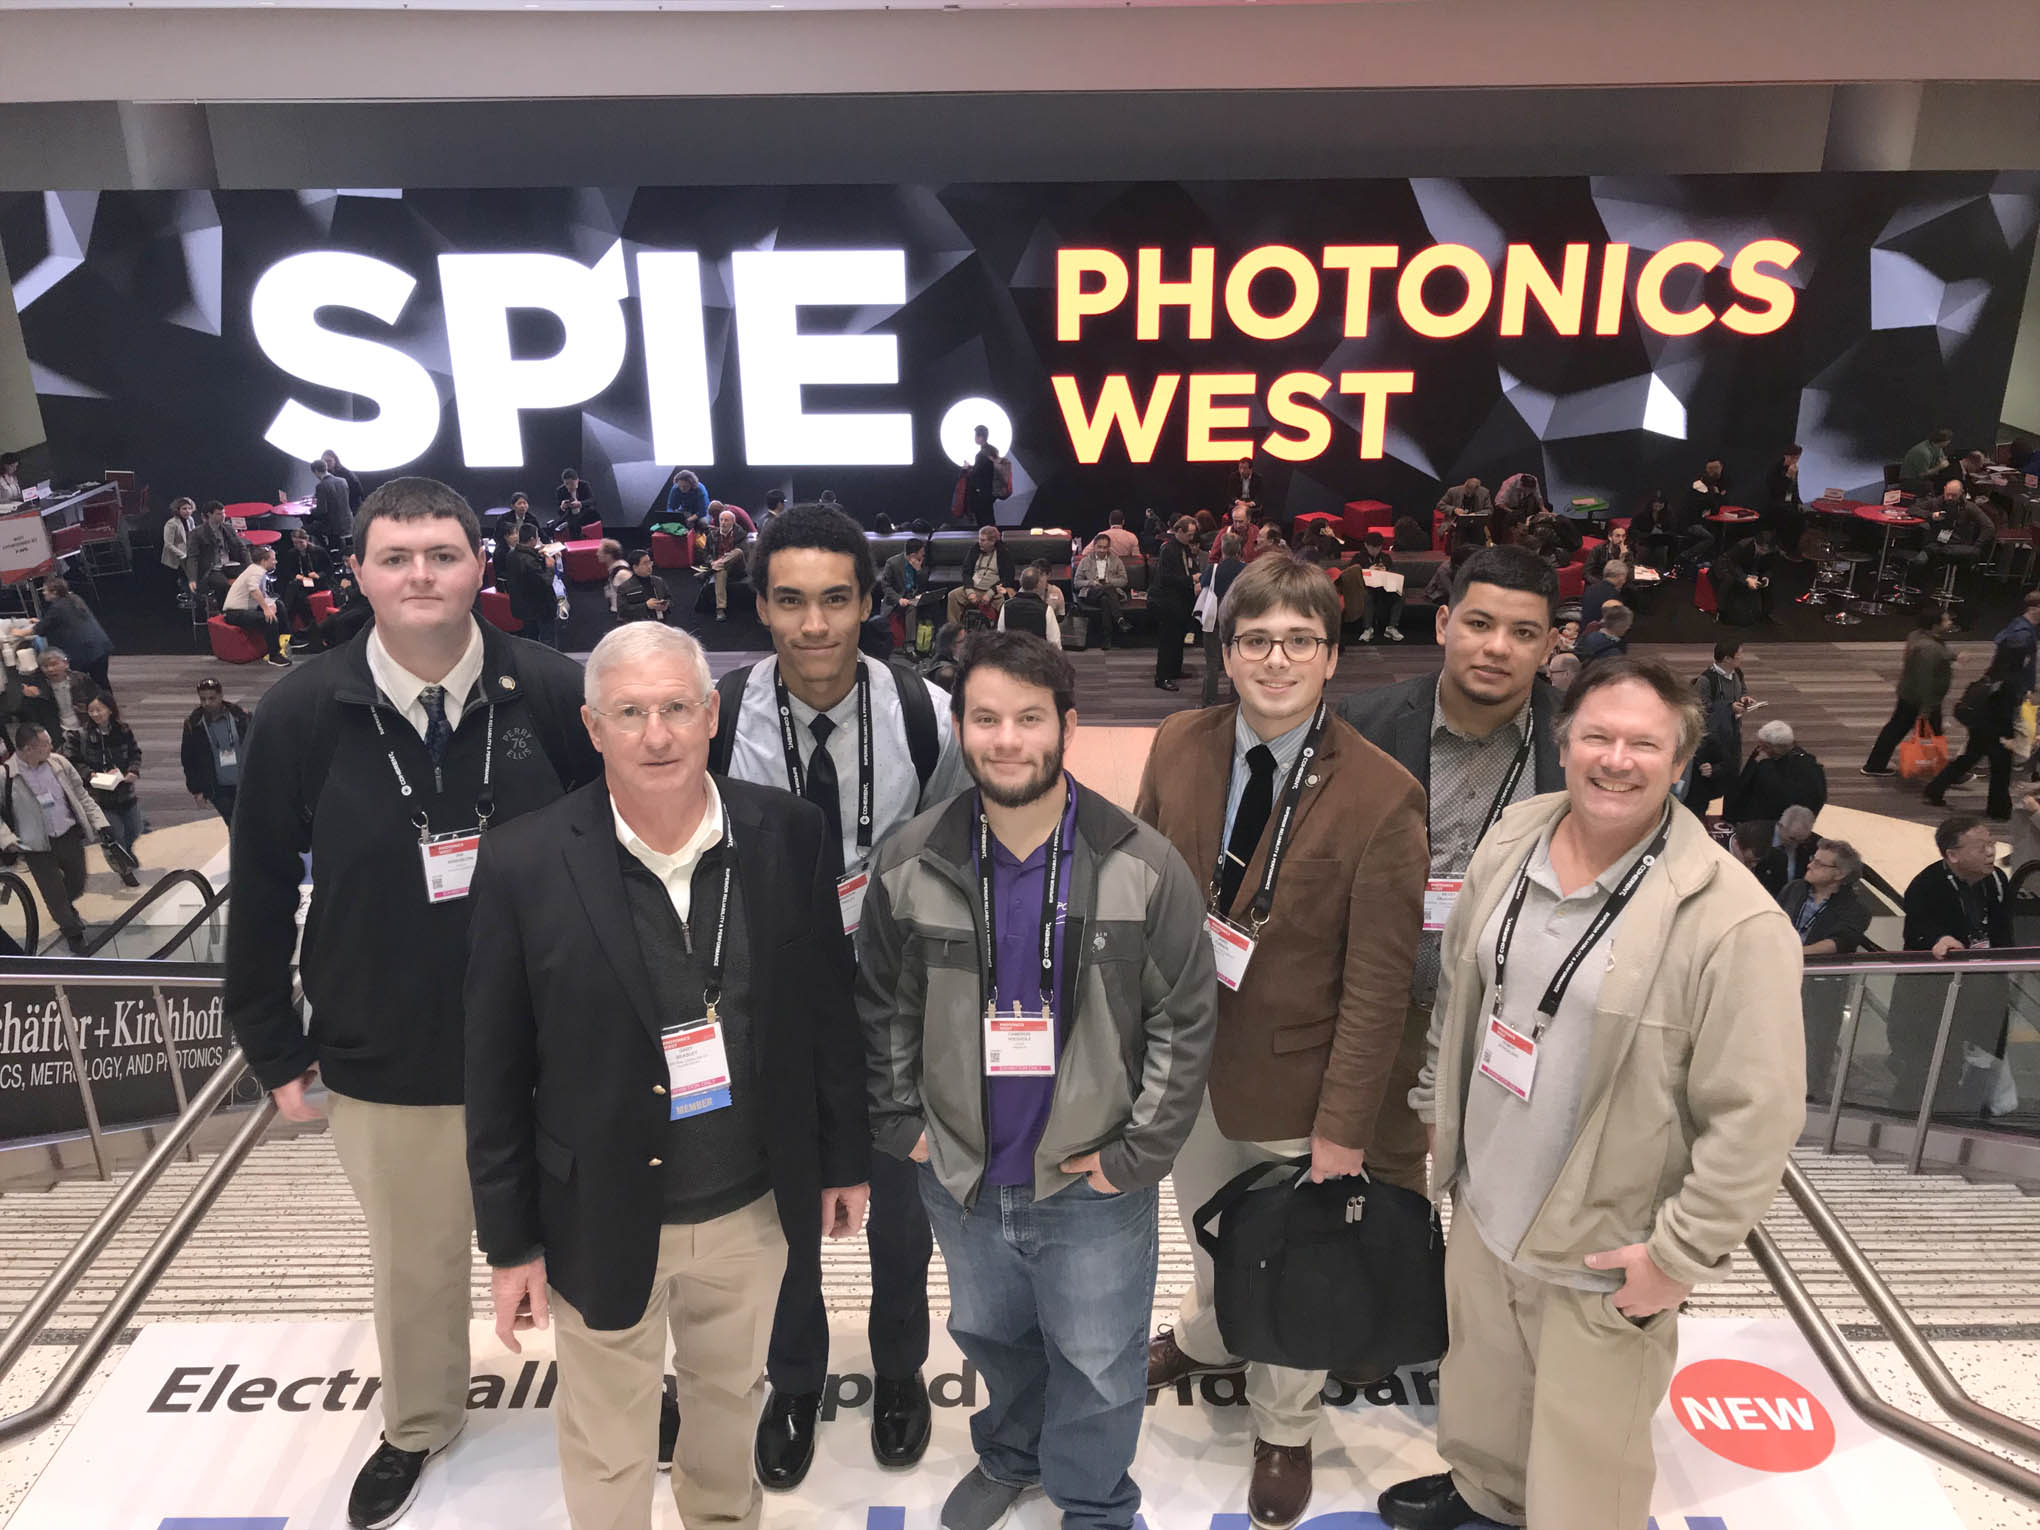 CCCC students attend national Photonics convention